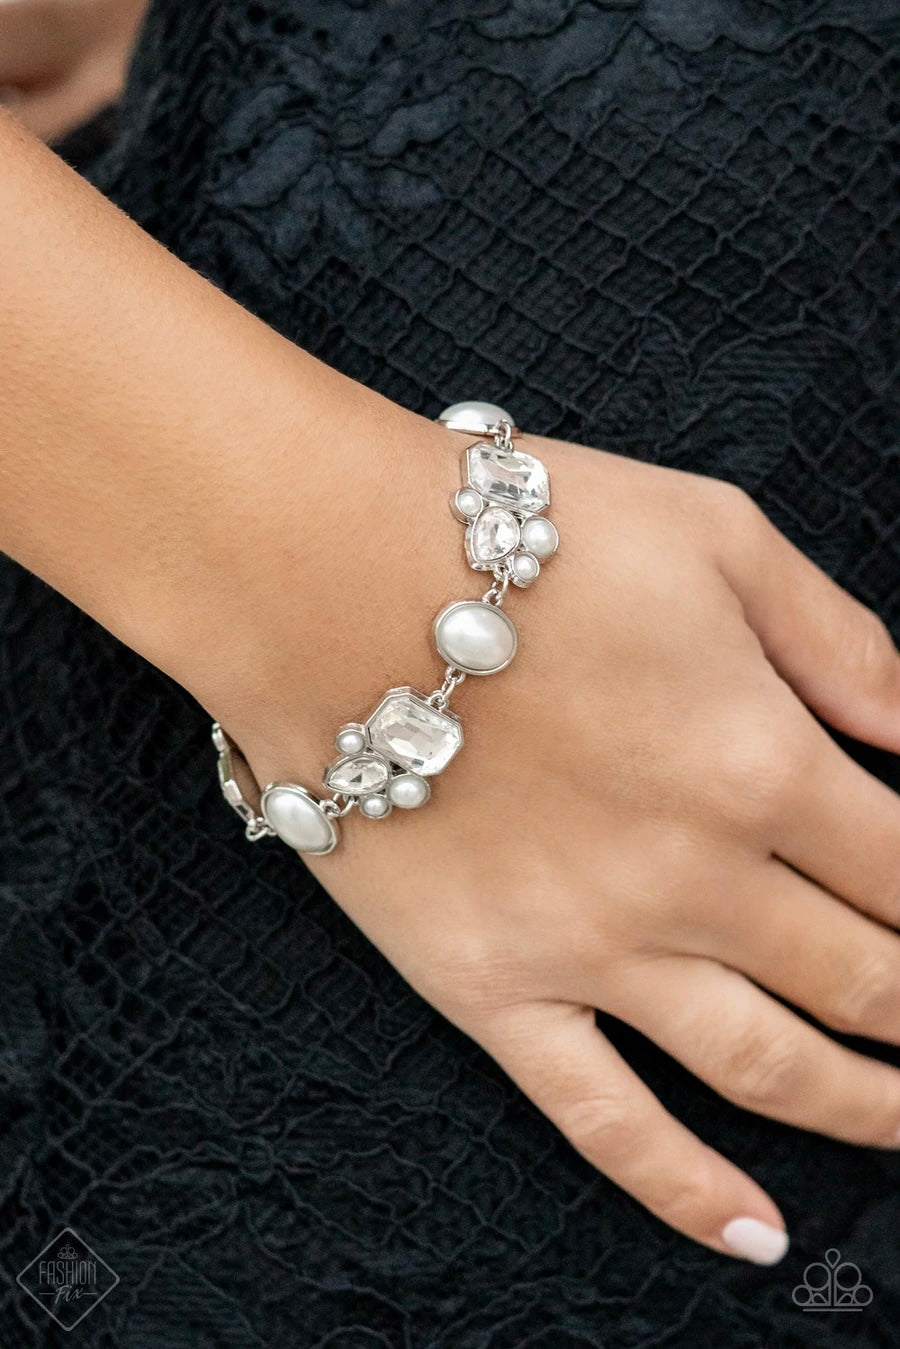 Paparazzi “Best in SHOWSTOPPING” White Bracelet